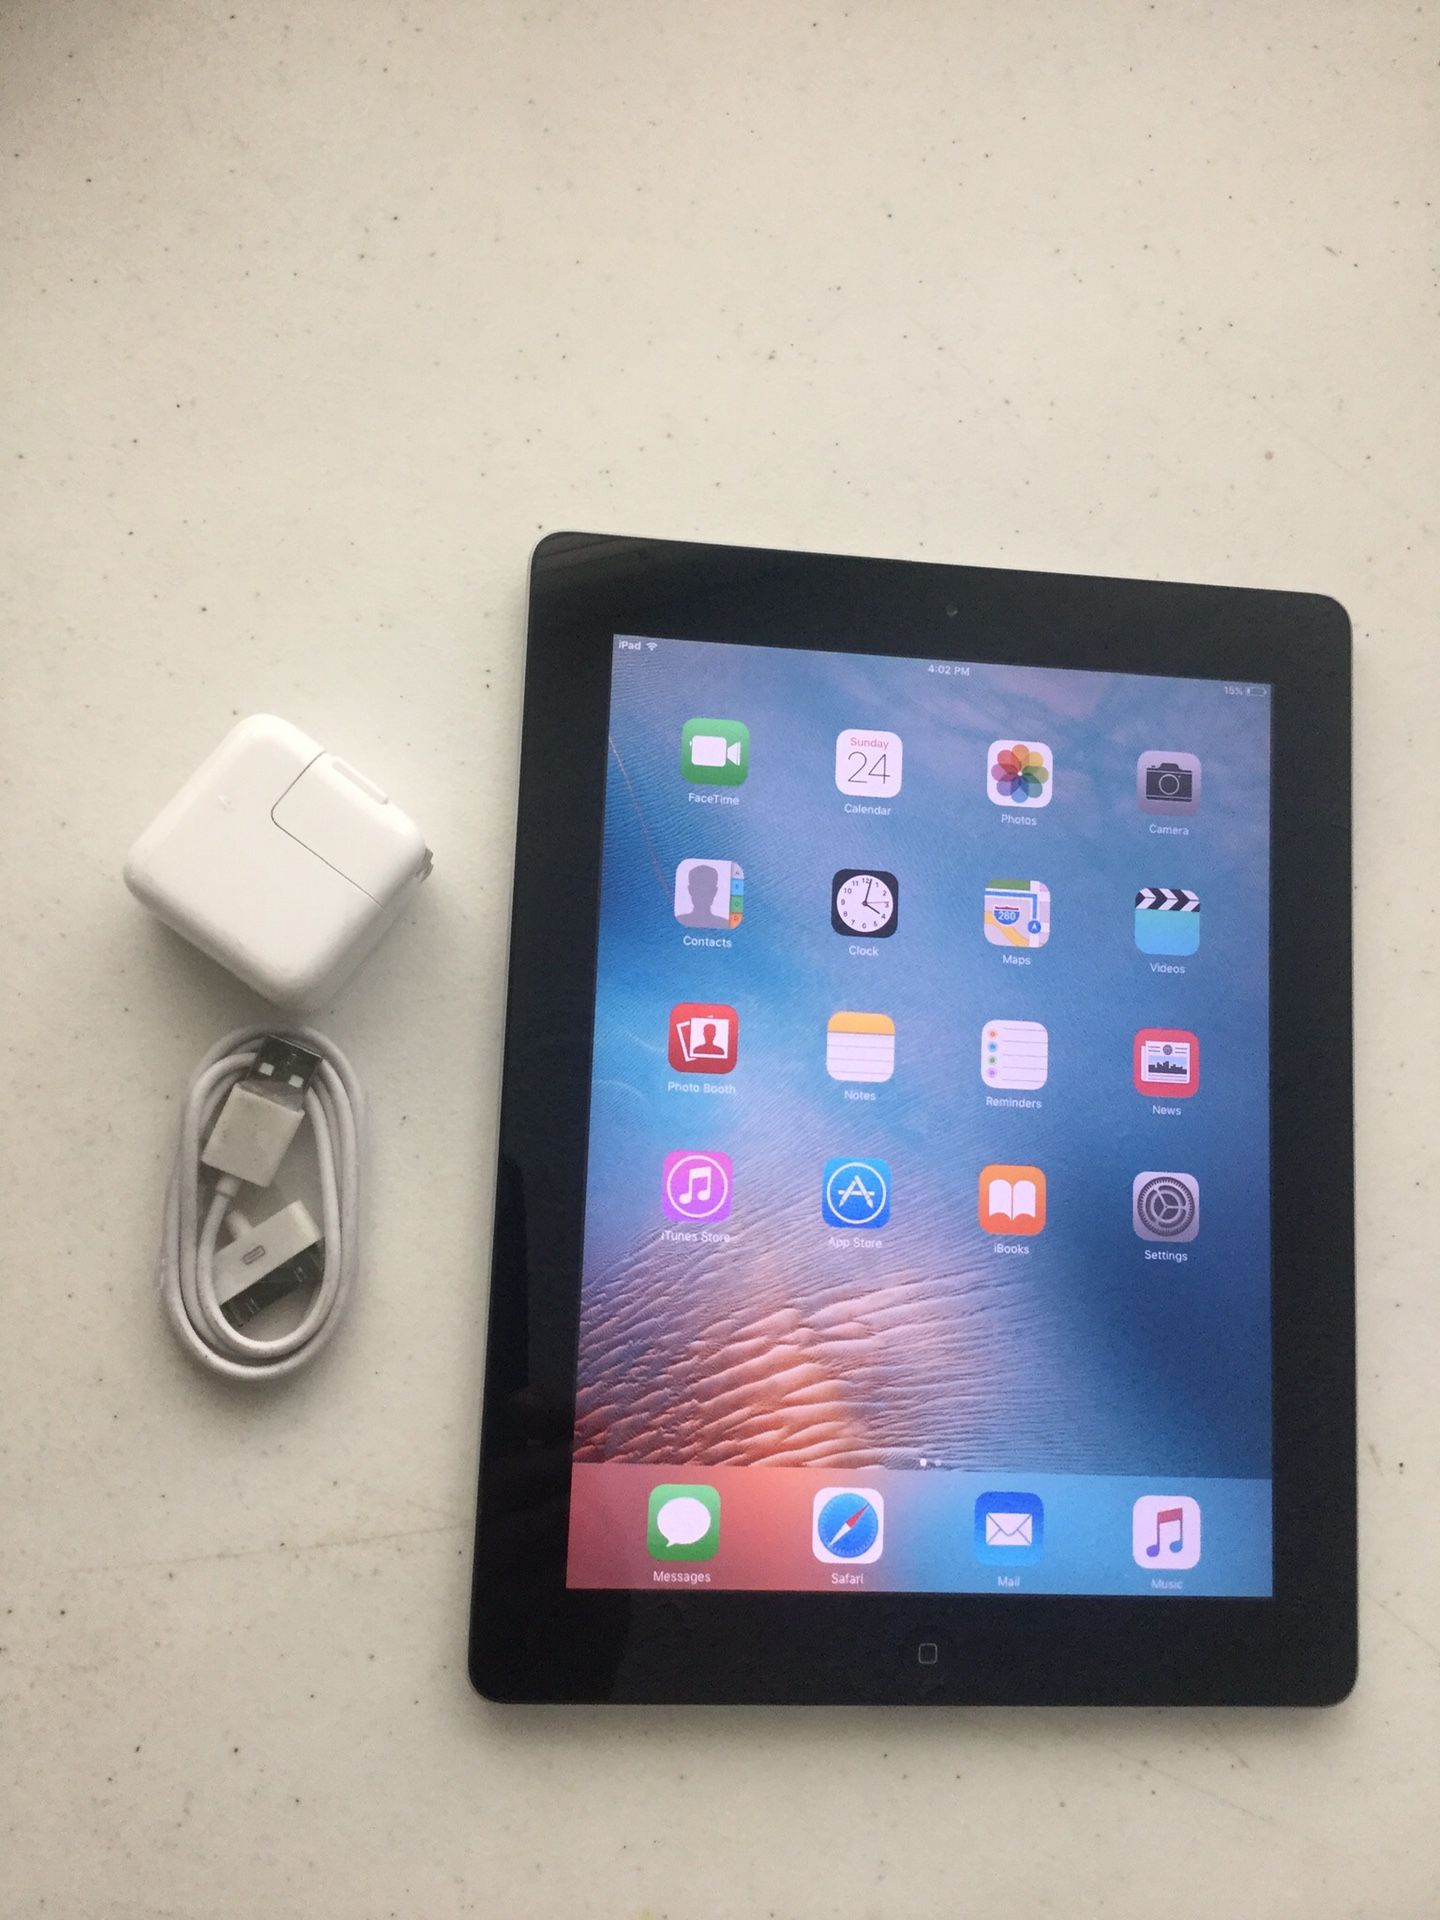 Apple iPad 2 16 GB WI-FI. COLOR BLACK.work very well included charger perfect condition.